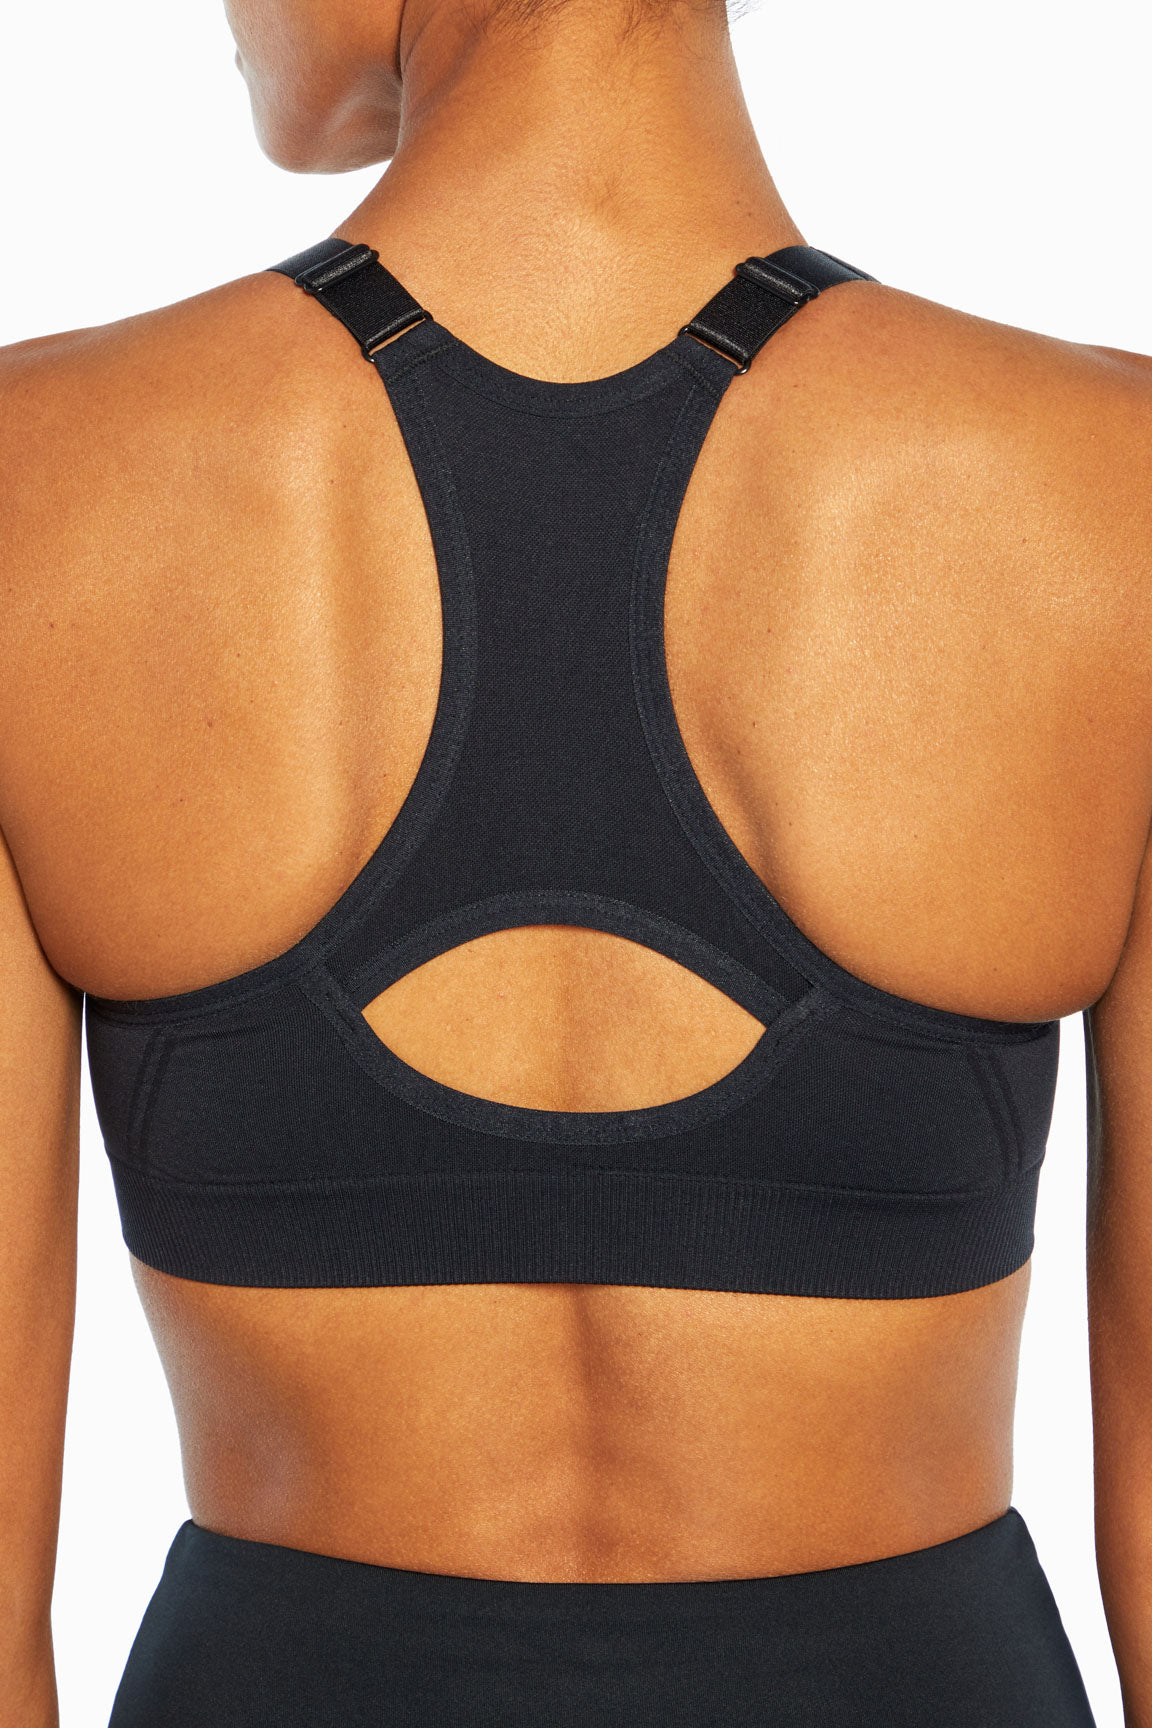 Marika Criss Cross Back Sports Bra - Movable and Breathable Design